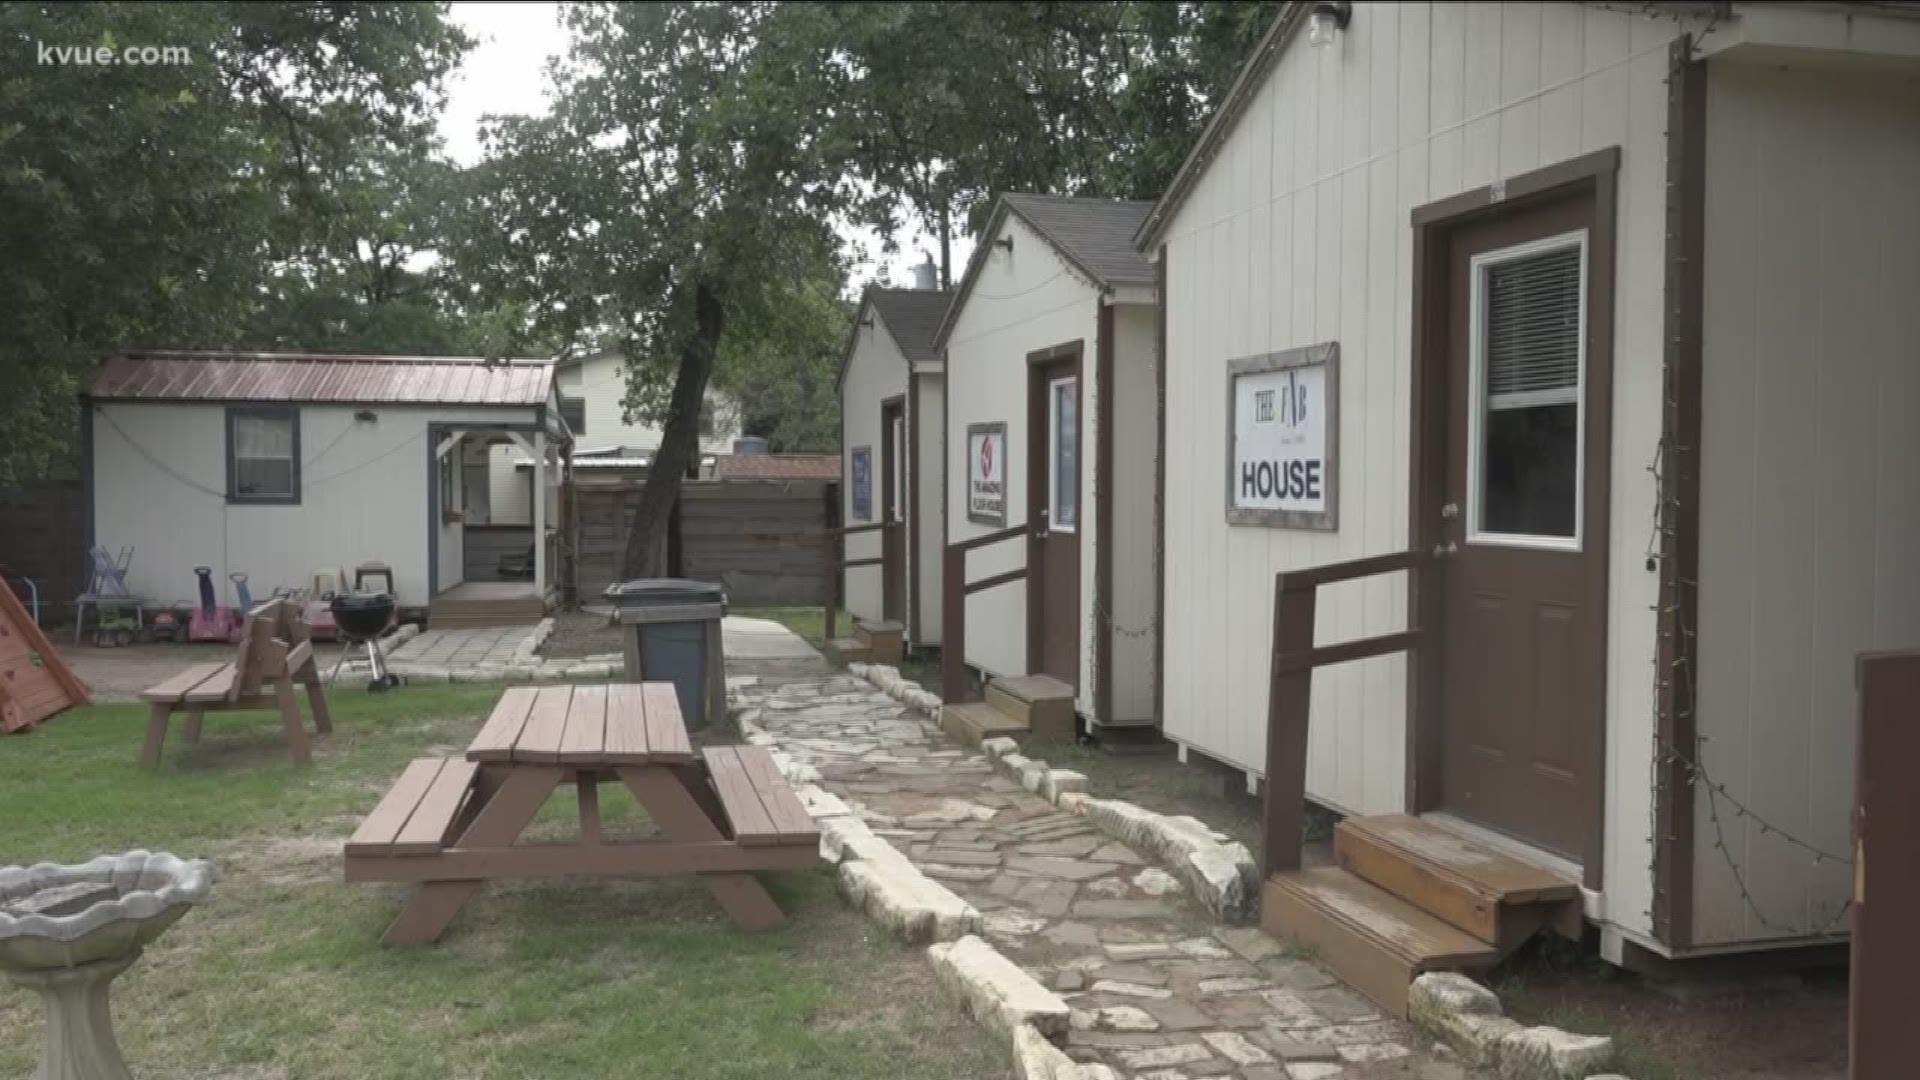 There's a demand to help meet the needs of the increasing homeless populations in some rural counties like Bastrop. Now one Texas university is stepping in to help.